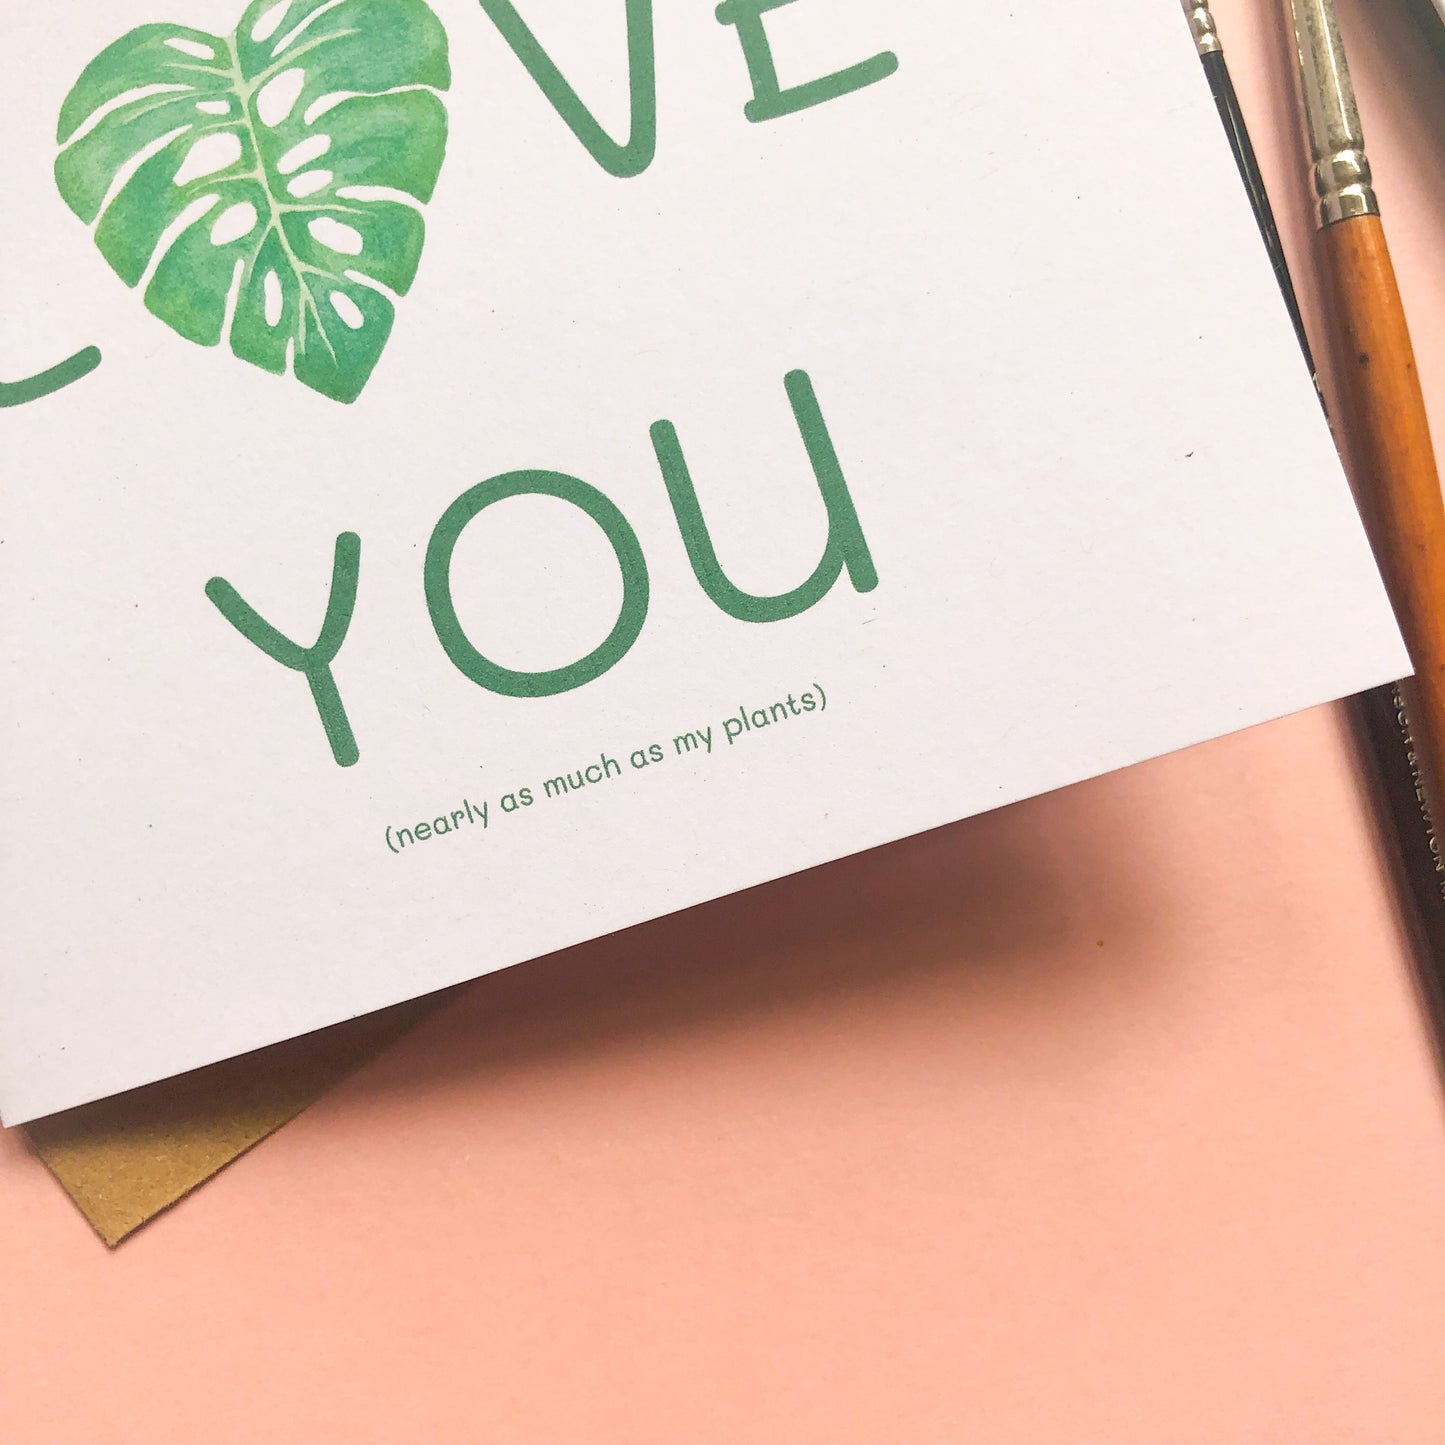 I Love You (nearly as much as my plants) Valentine's Day Card